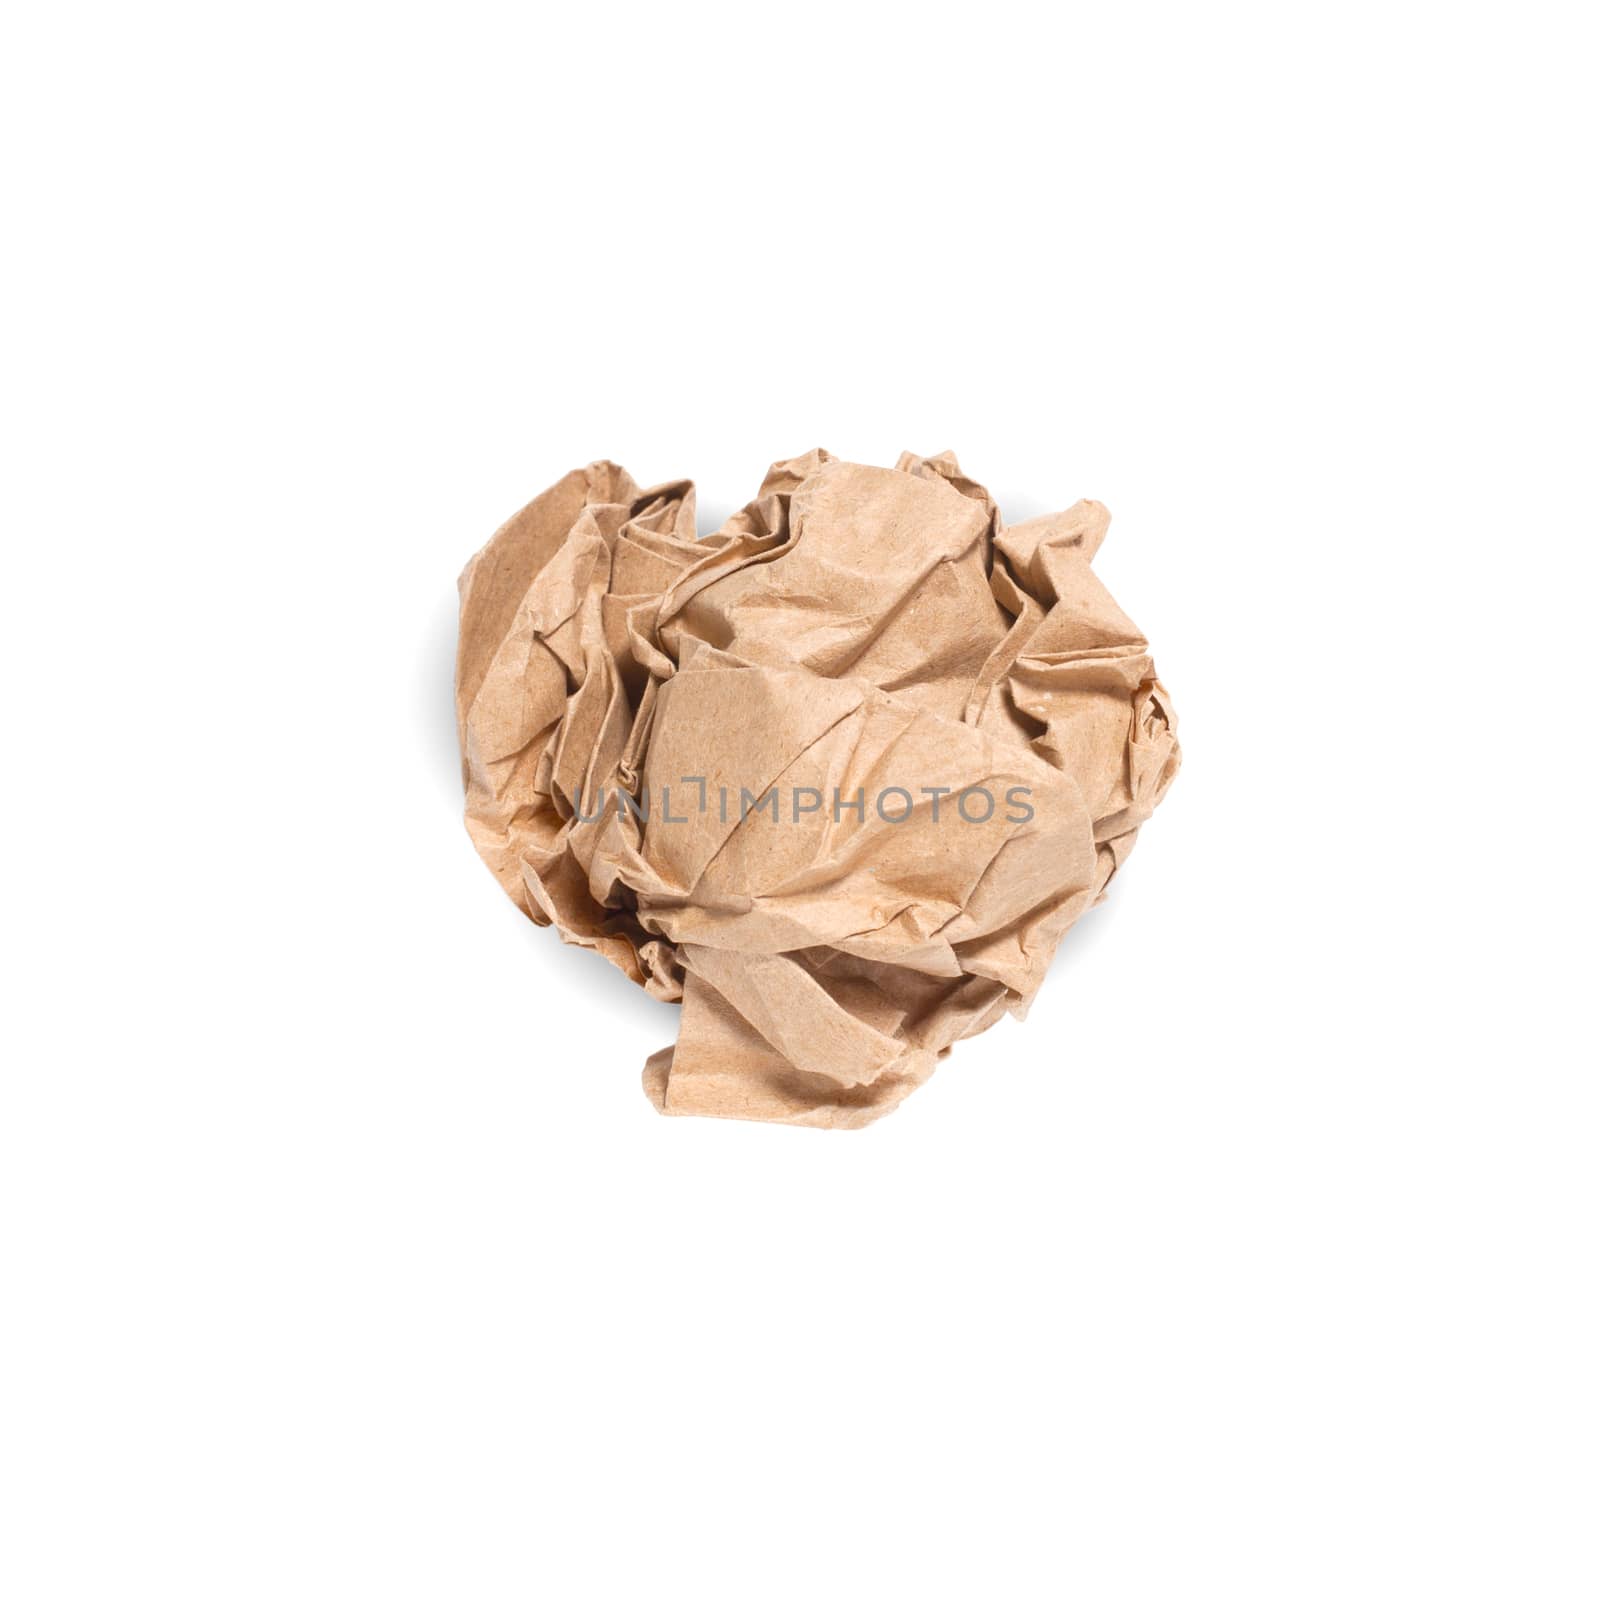 Crumpled brown paper ball isolated over white background. Bluren concept